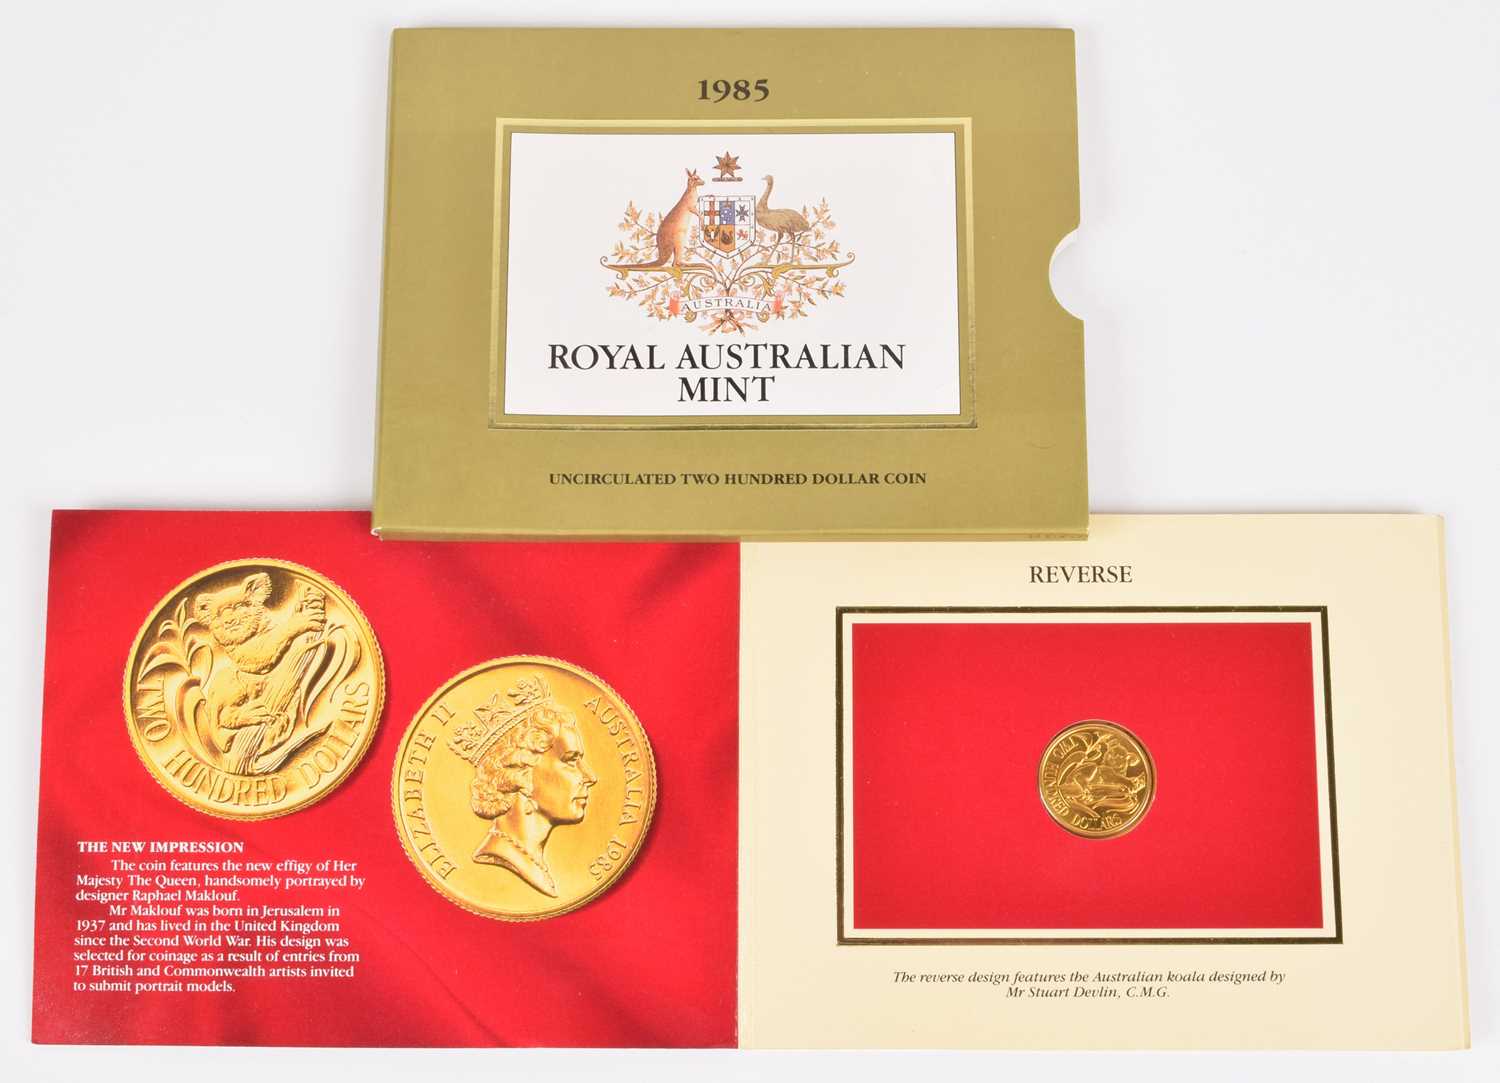 Lot 212 - Royal Australian Mint, Uncirculated Two Hundred Dollar gold coin, 1985.